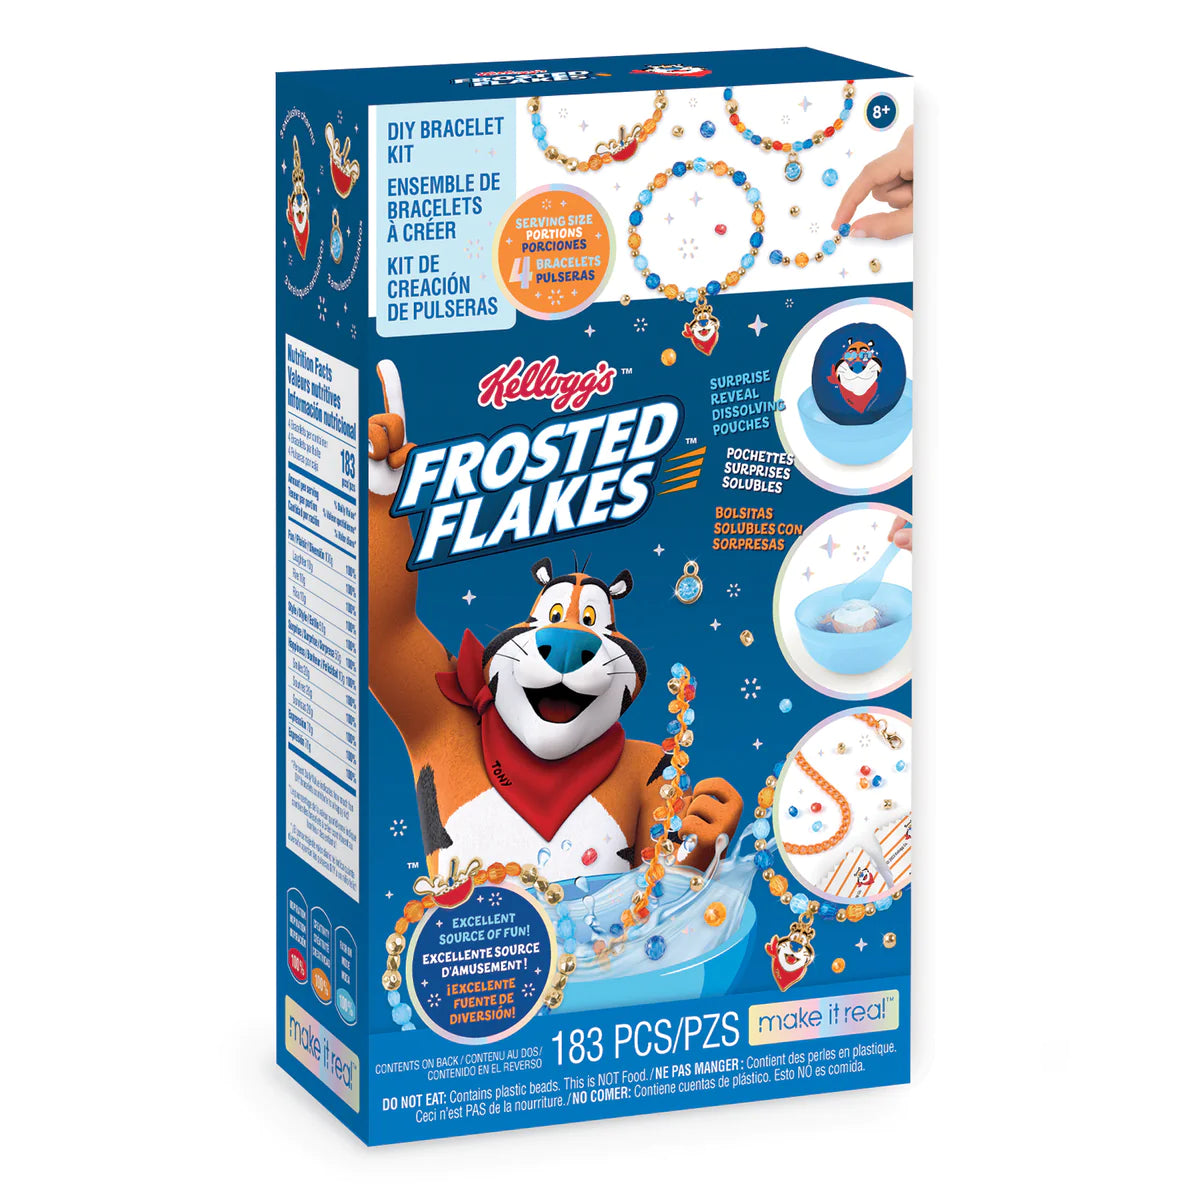 Cerealsly Cute: Frosted Flakes Cover